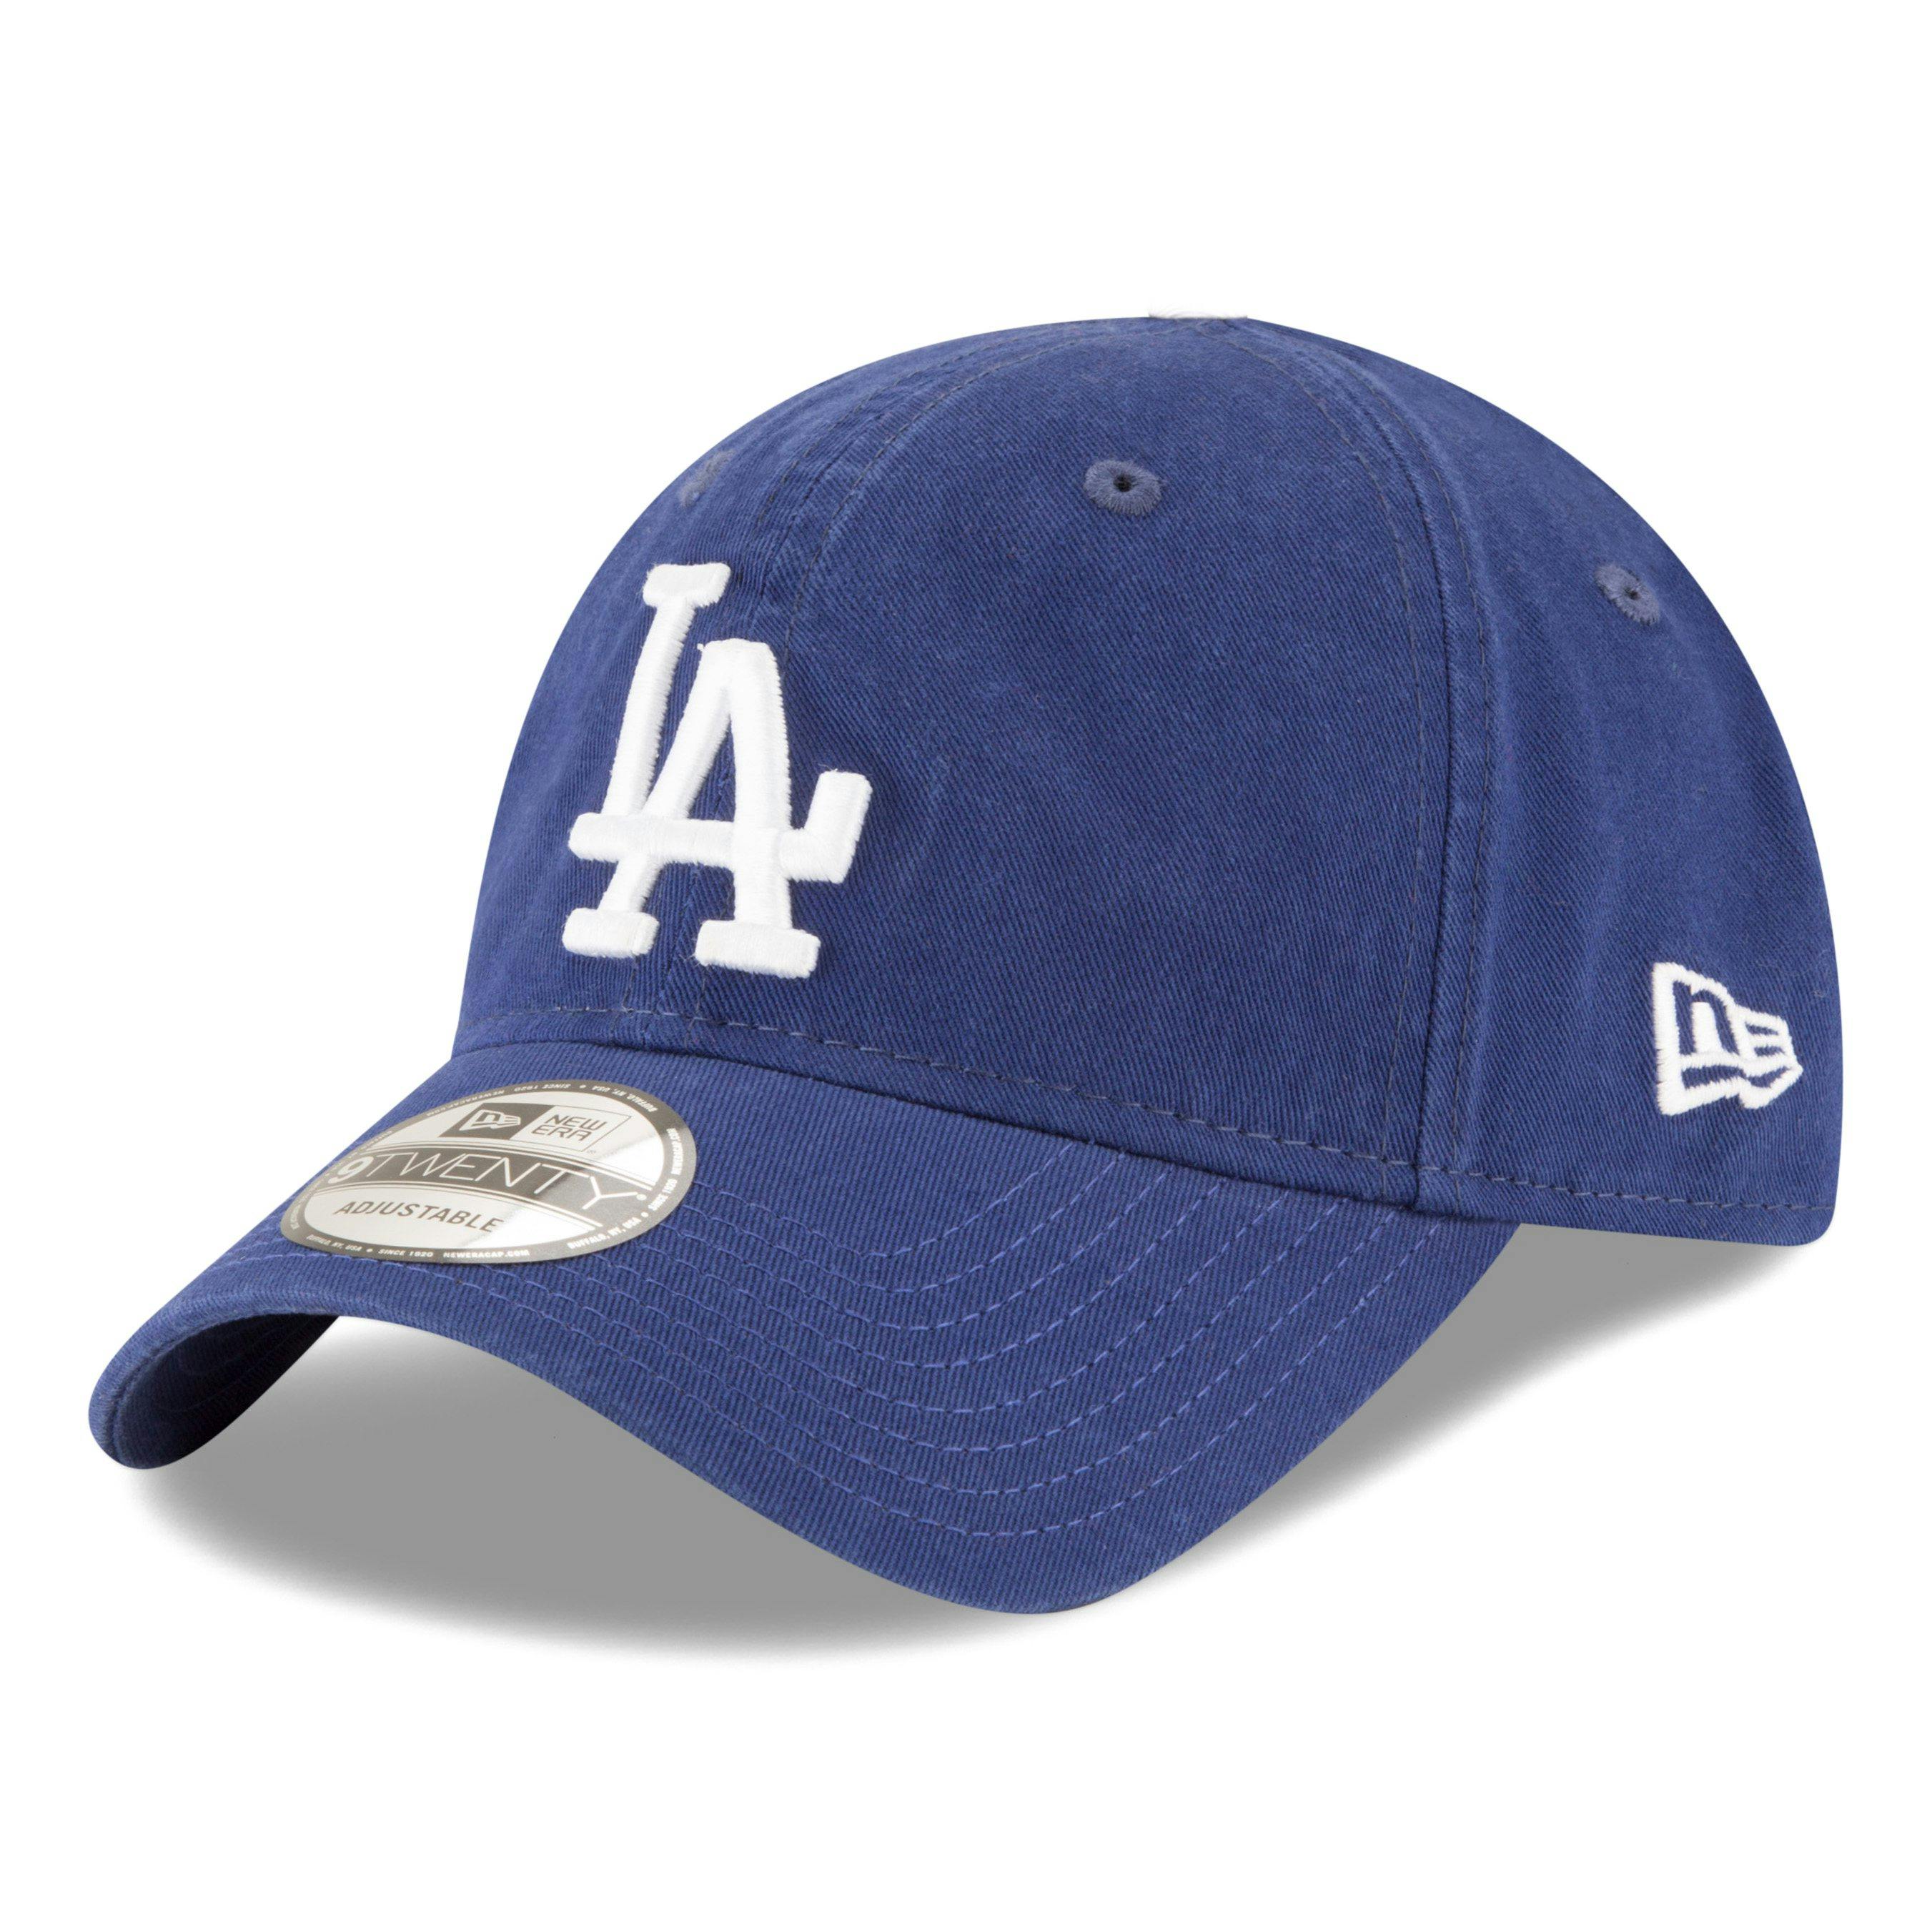 Los Angeles Dodgers Dog Jersey - White